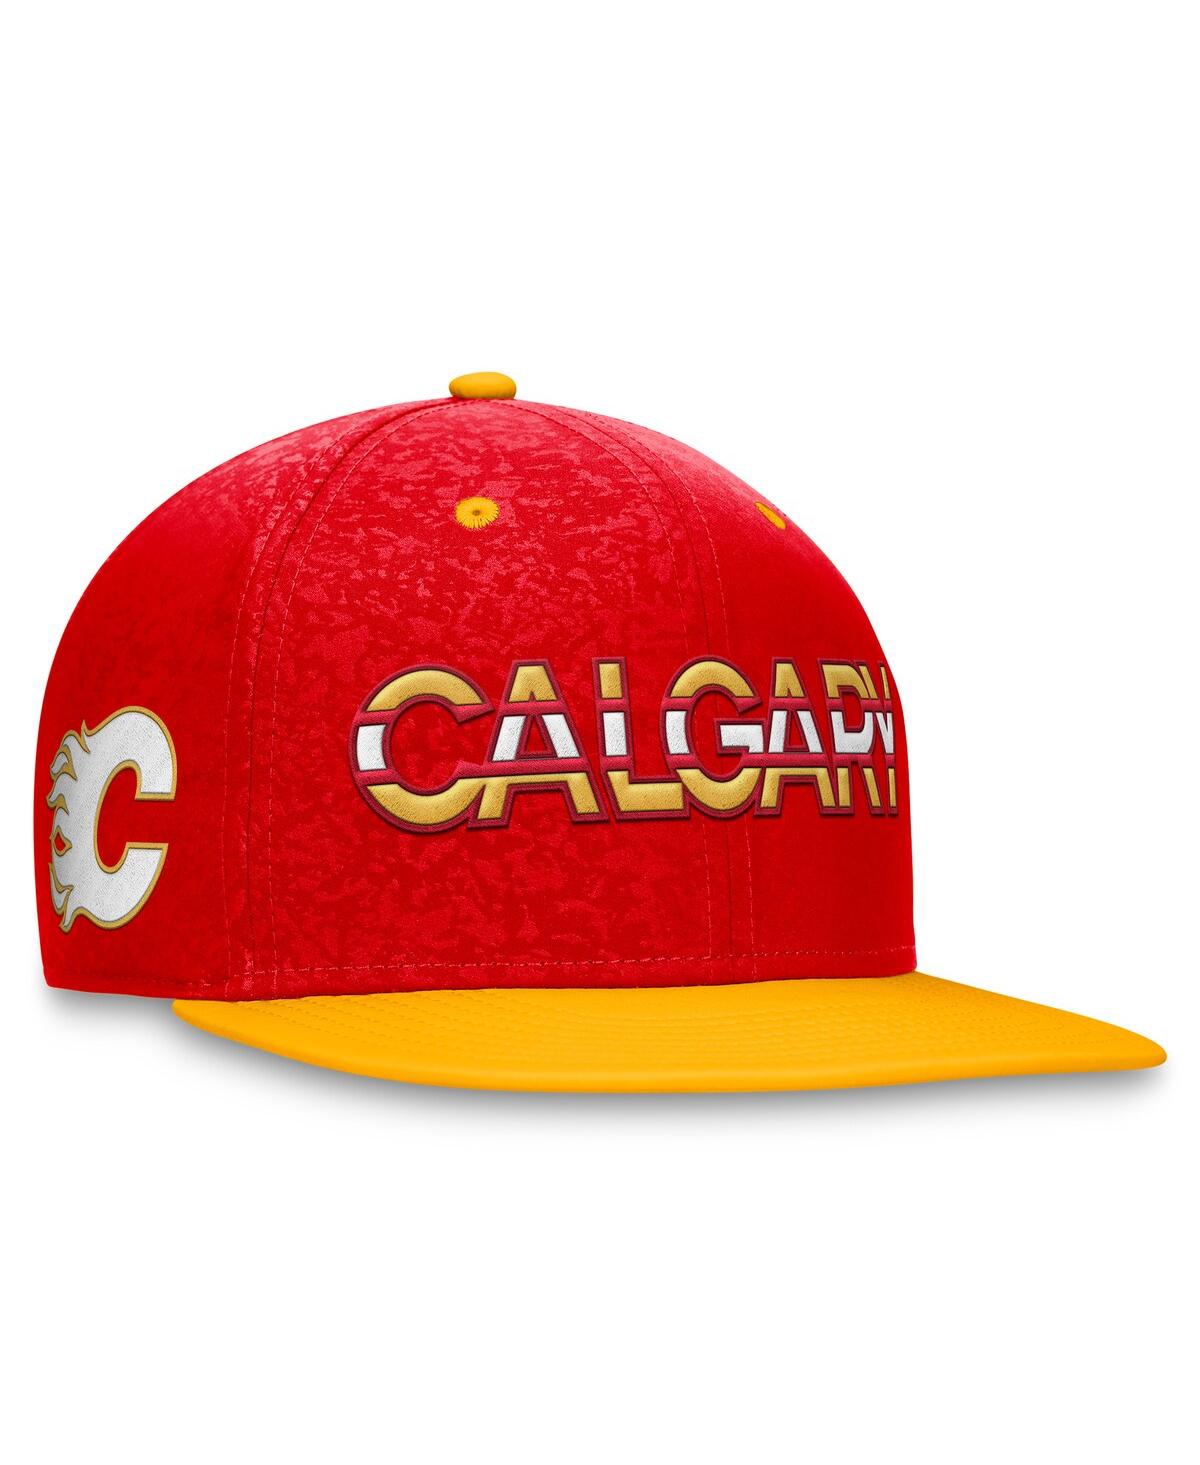 Men's Fanatics Red, Yellow Calgary Flames Authentic Pro Rink Two-Tone Snapback Hat - Red, Yellow